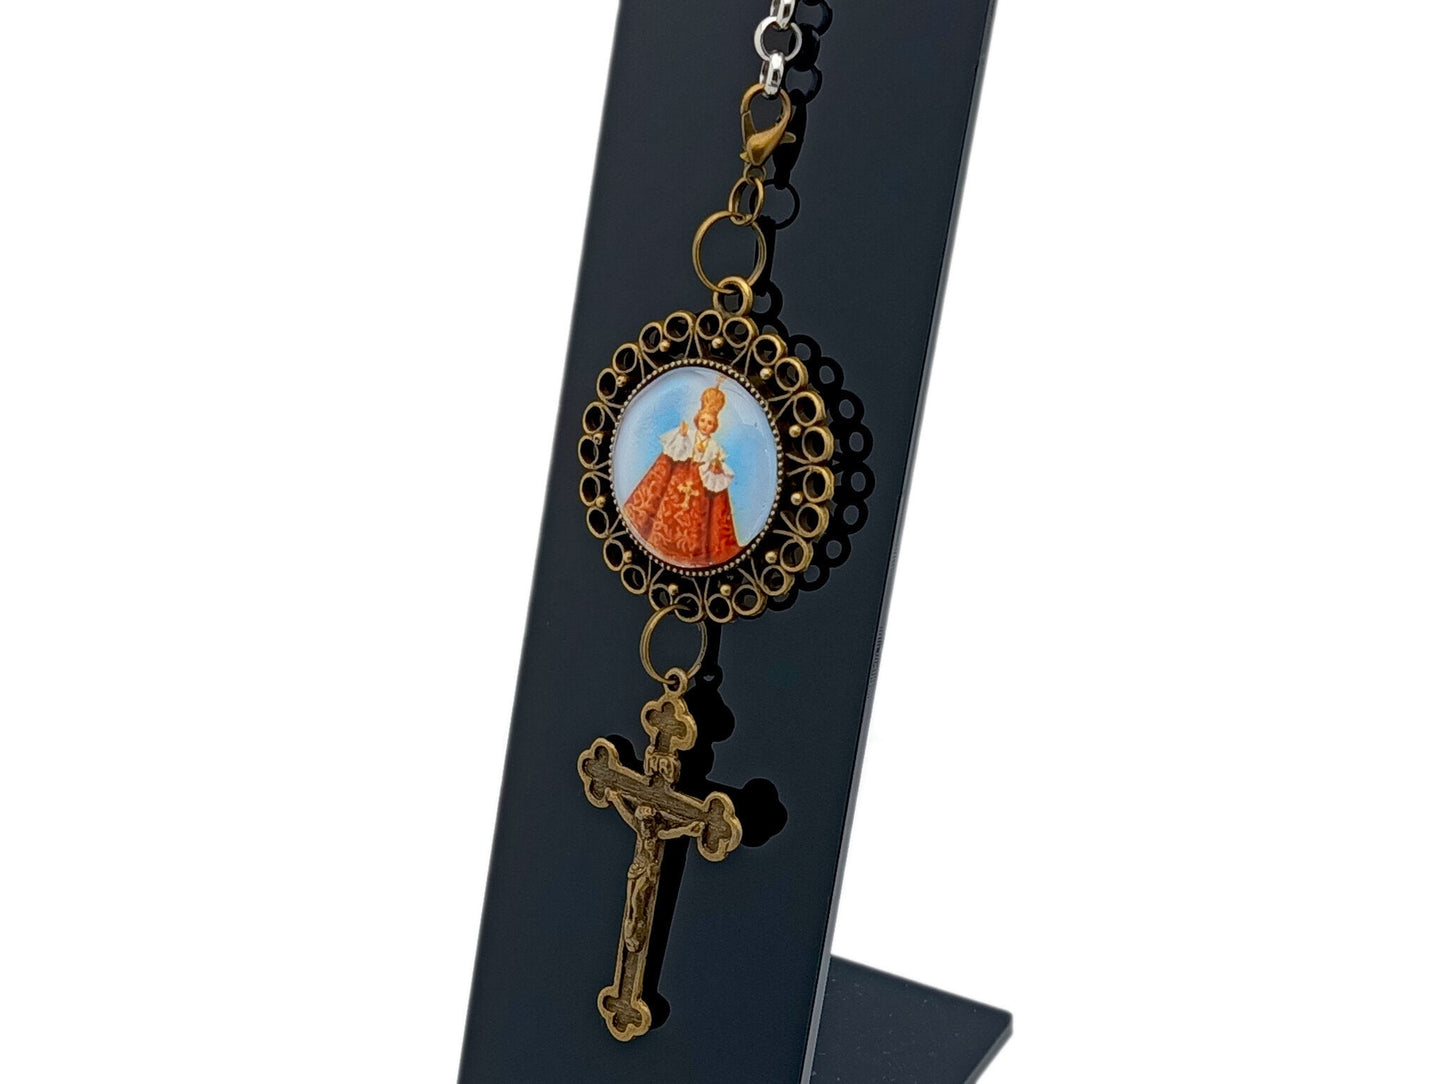 Vintage style Infant of Prague unique rosary beads purse clip key chain with brass crucifix.